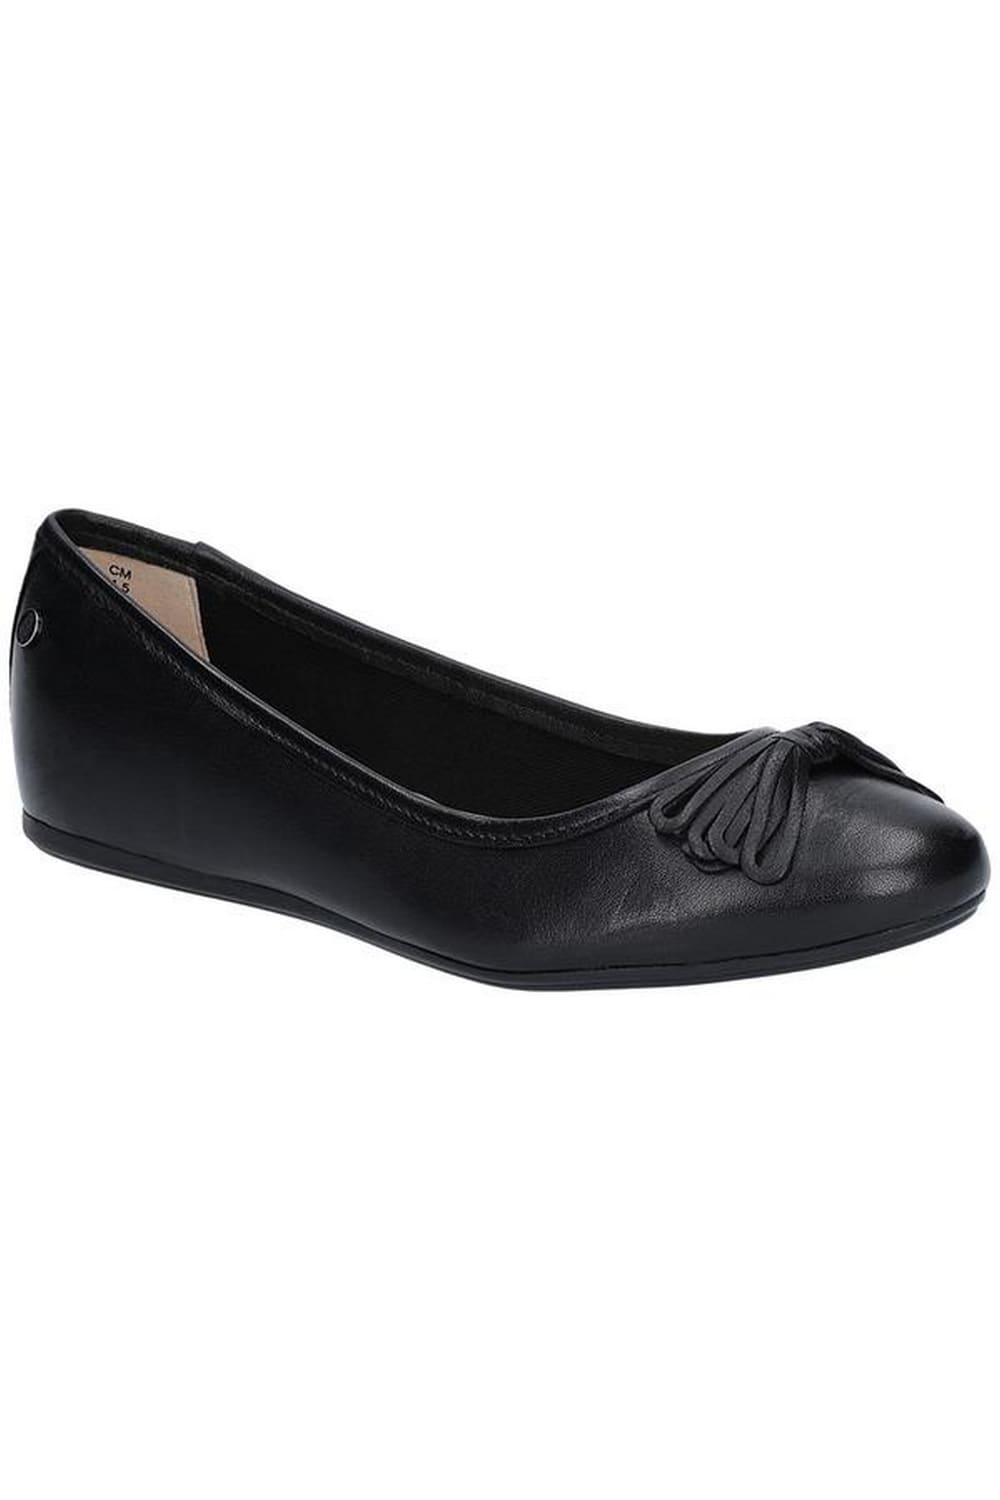 Hush Puppies Womens/Ladies Heather Bow Leather Ballet Shoes